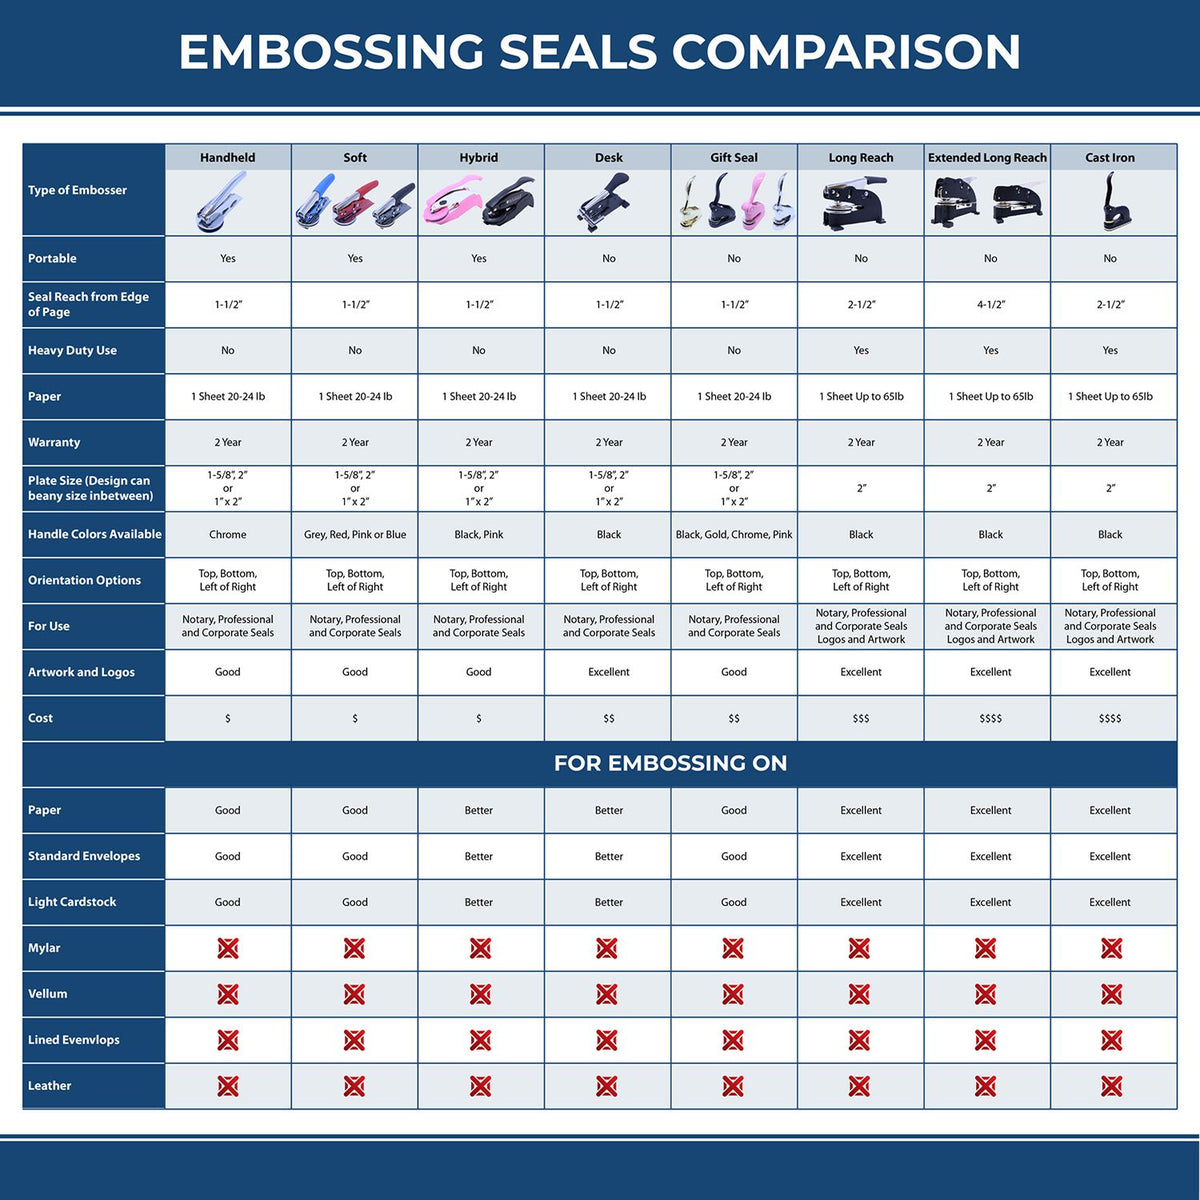 A comparison chart for the different types of mount models available for the Long Reach Connecticut Land Surveyor Seal.